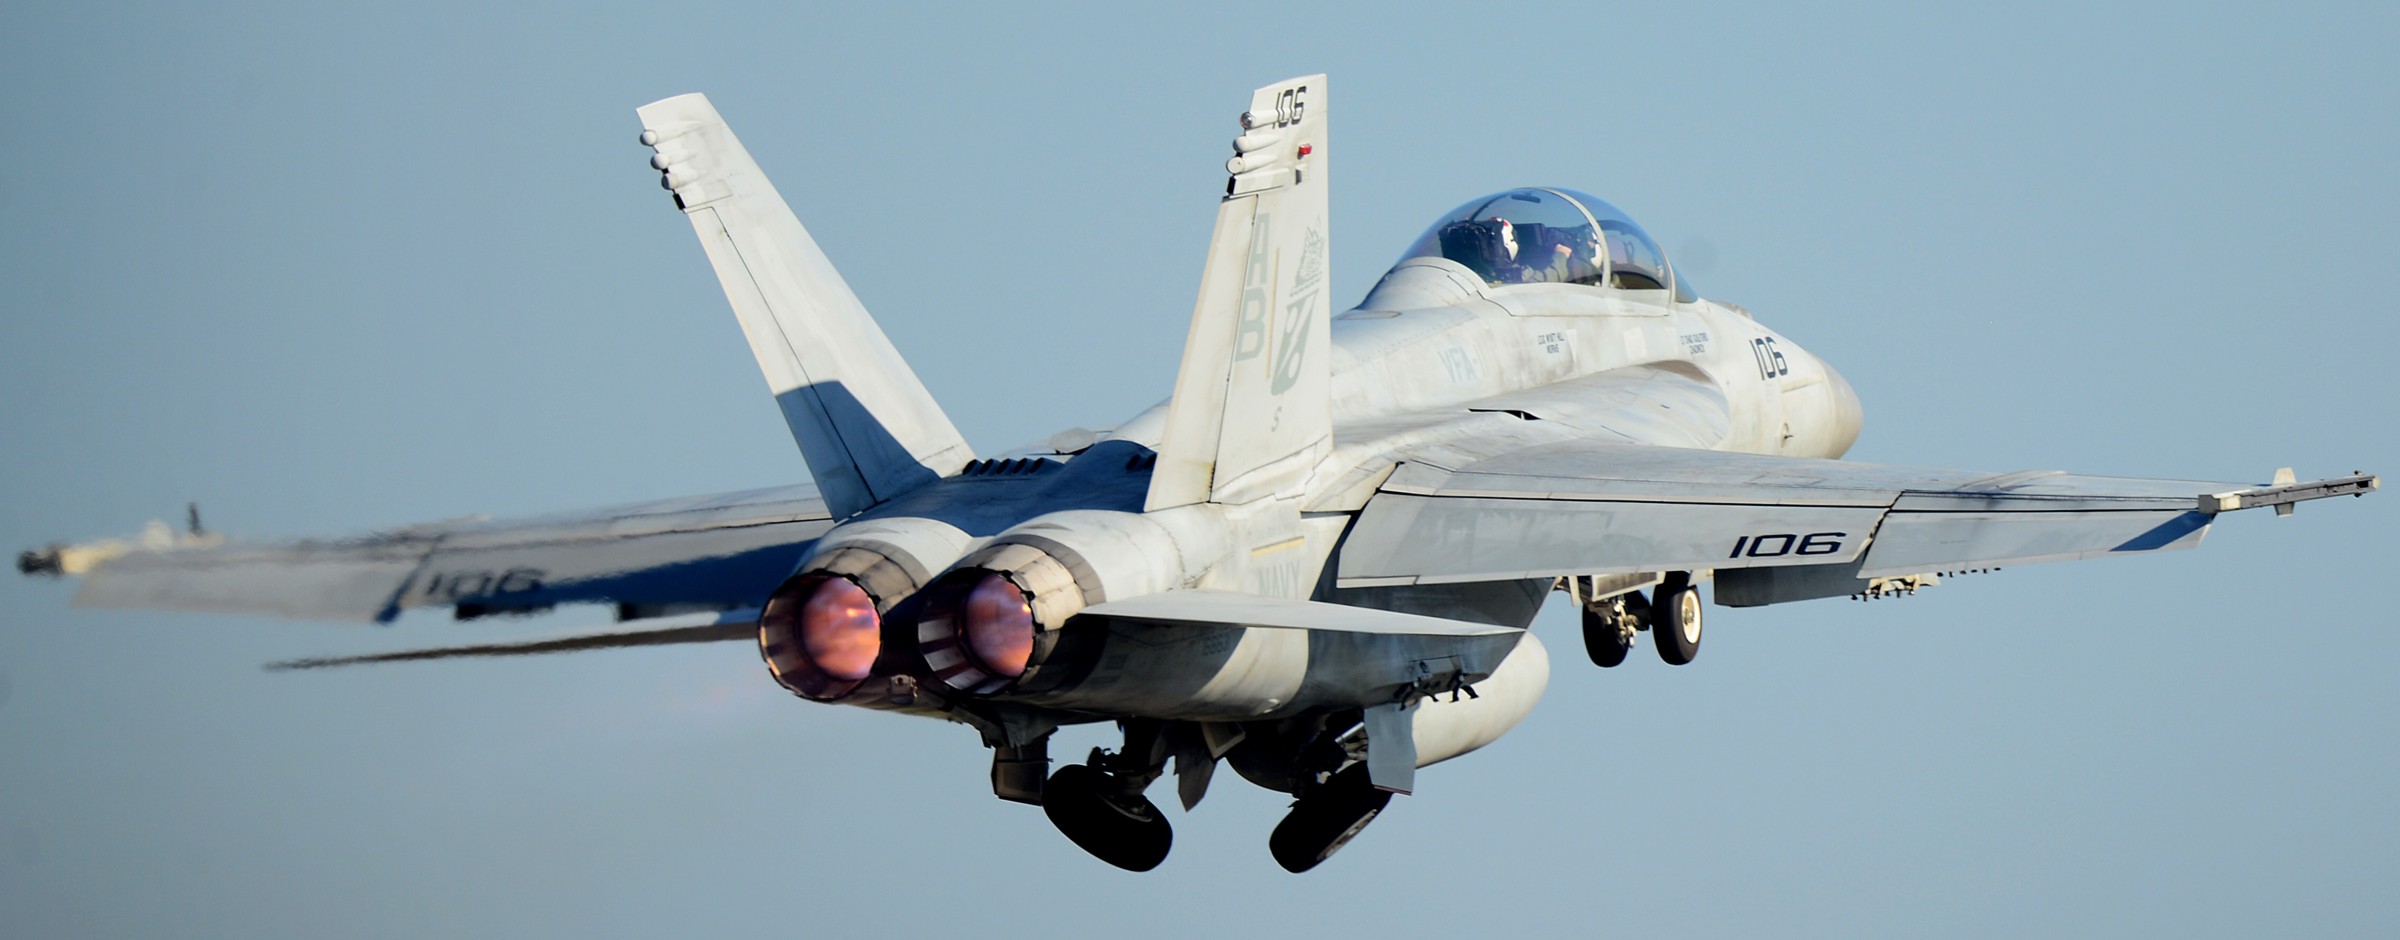 vfa-11 red rippers strike fighter squadron us navy f/a-18f super hornet raf lakenheath uk 95